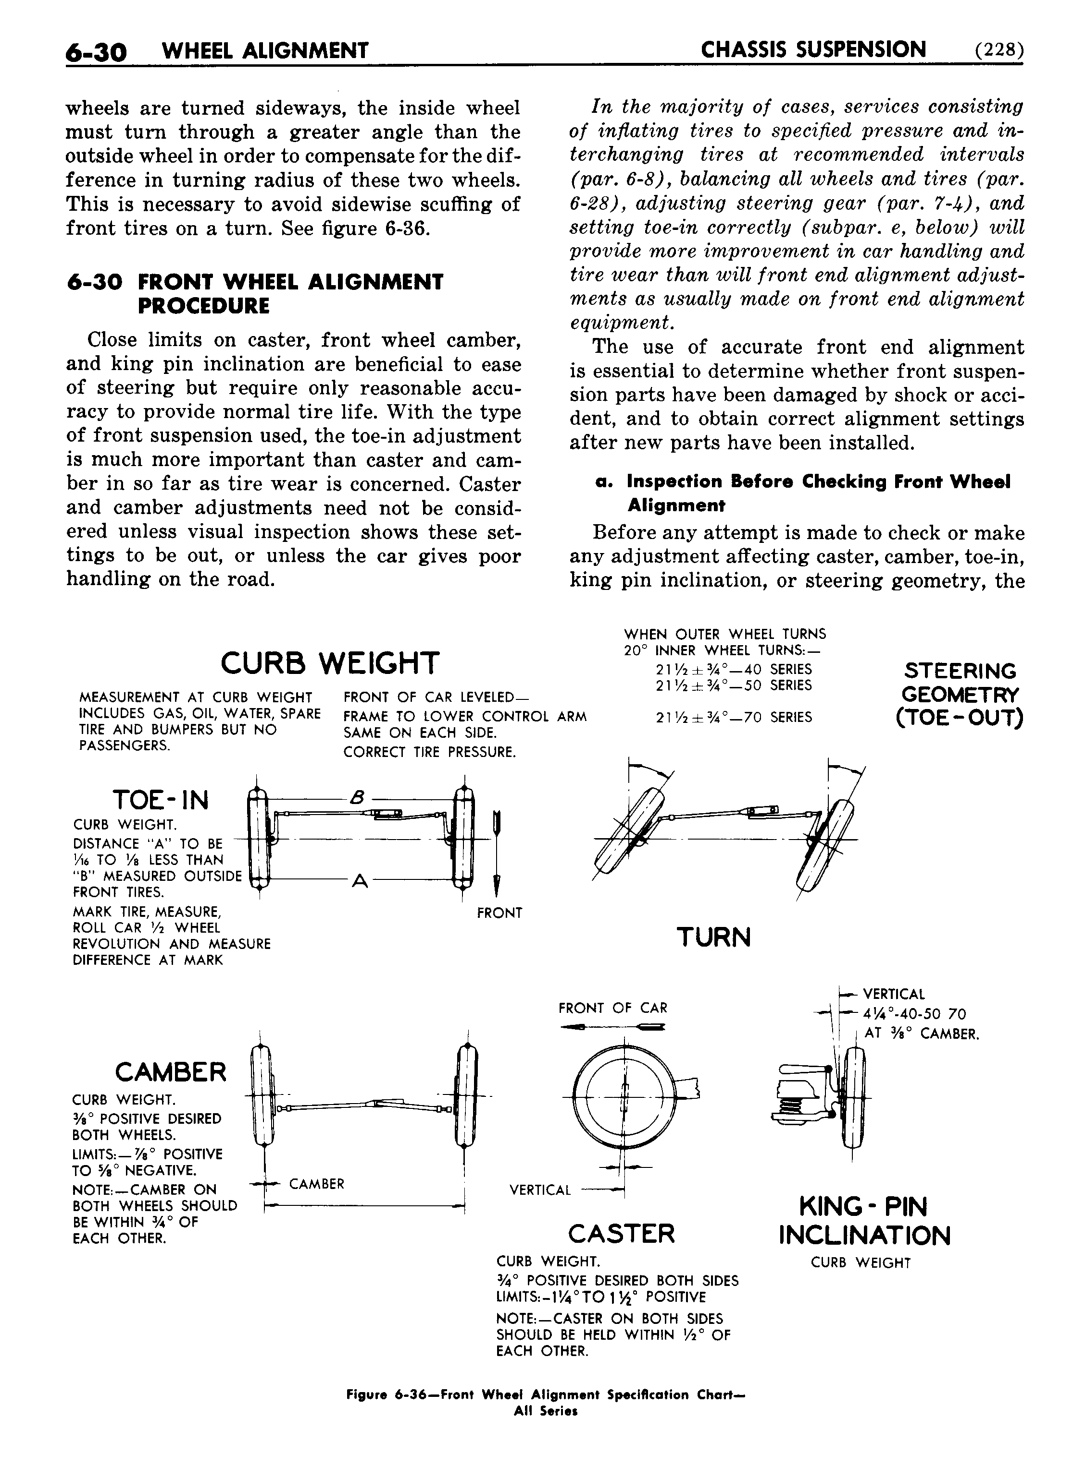 n_07 1948 Buick Shop Manual - Chassis Suspension-030-030.jpg